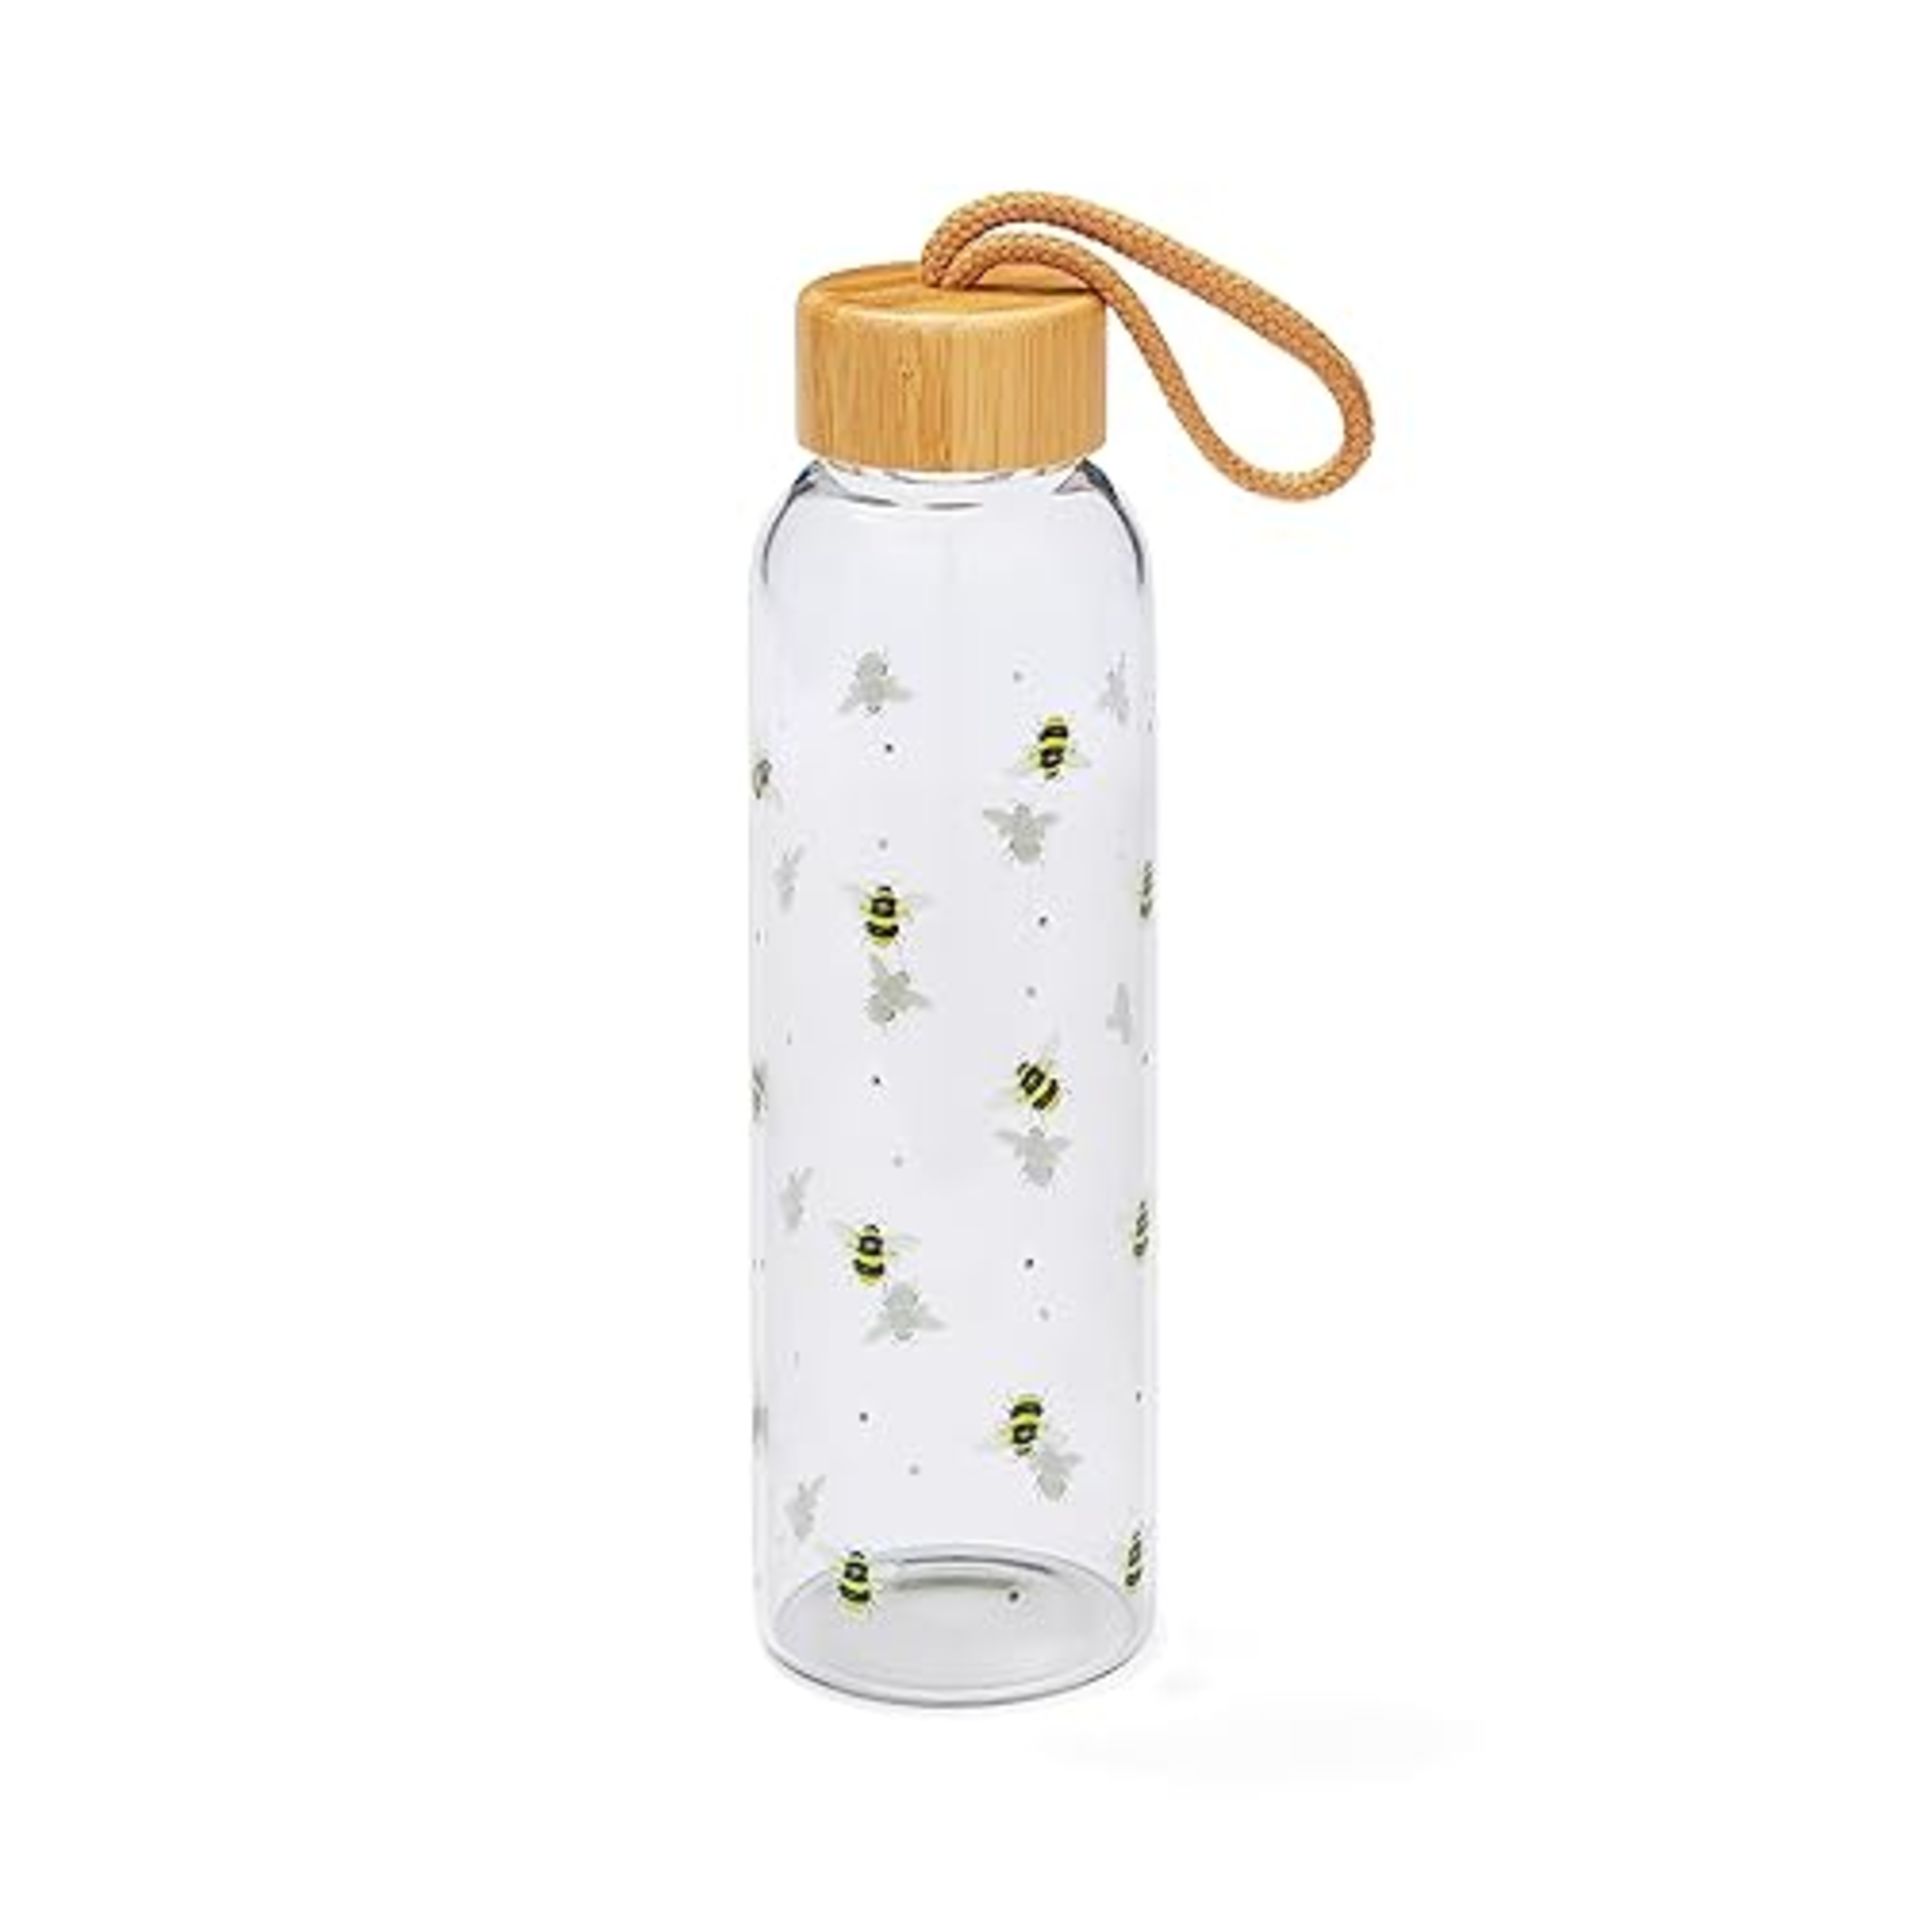 Cooksmart 500ml Glass Water Bottle | Eco Friendly Glass Bottle With Lid & Carry Handle | Glass Bott